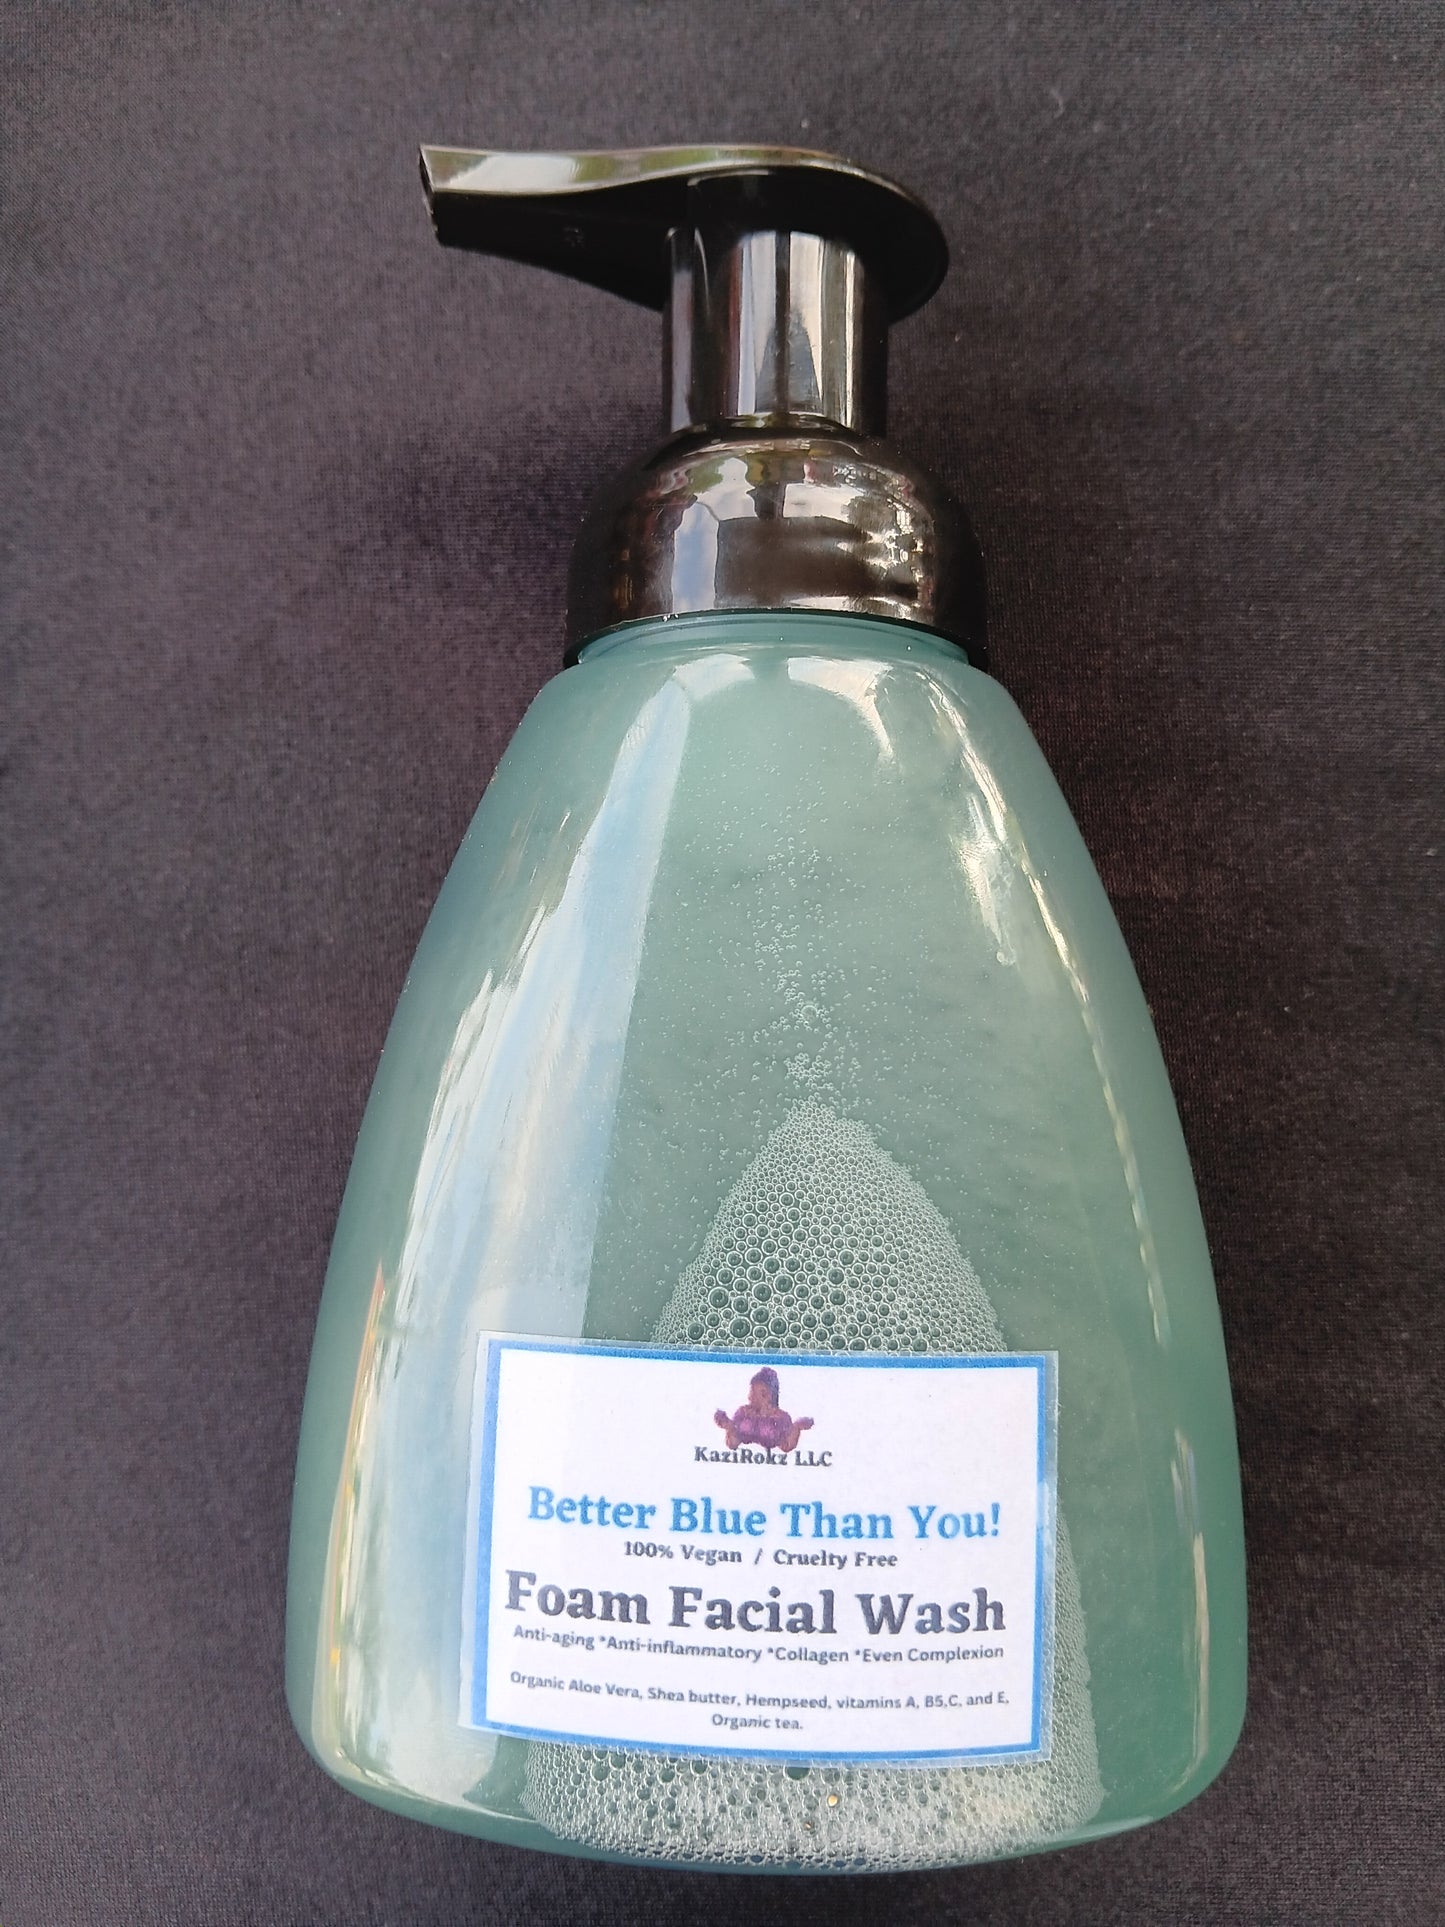 Better Blue Than You! Foam Facial Wash 10oz (100% Vegan / Cruelty Free) Anti-Aging, Anti-Inflammatory, Collagen, Even Complextion